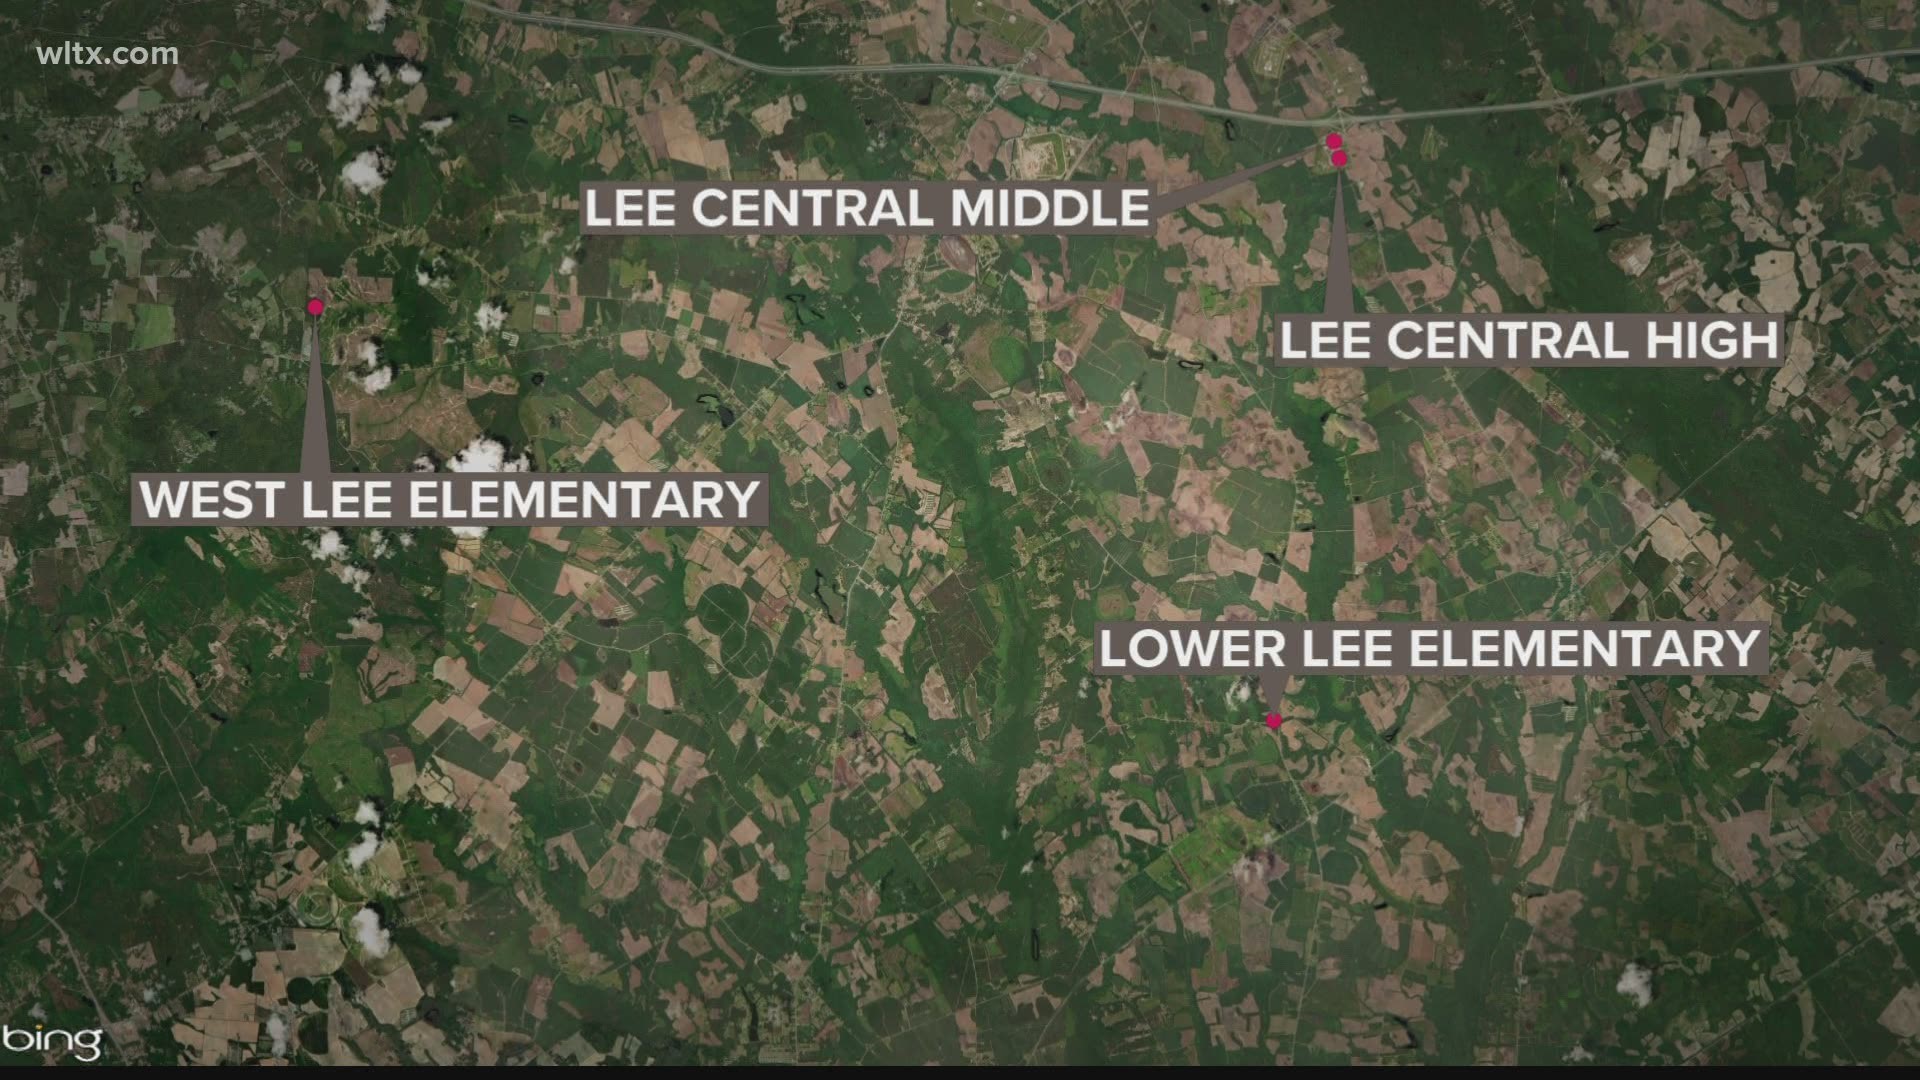 The schools, like the county, were named in honor of Gen. Robert E. Lee.